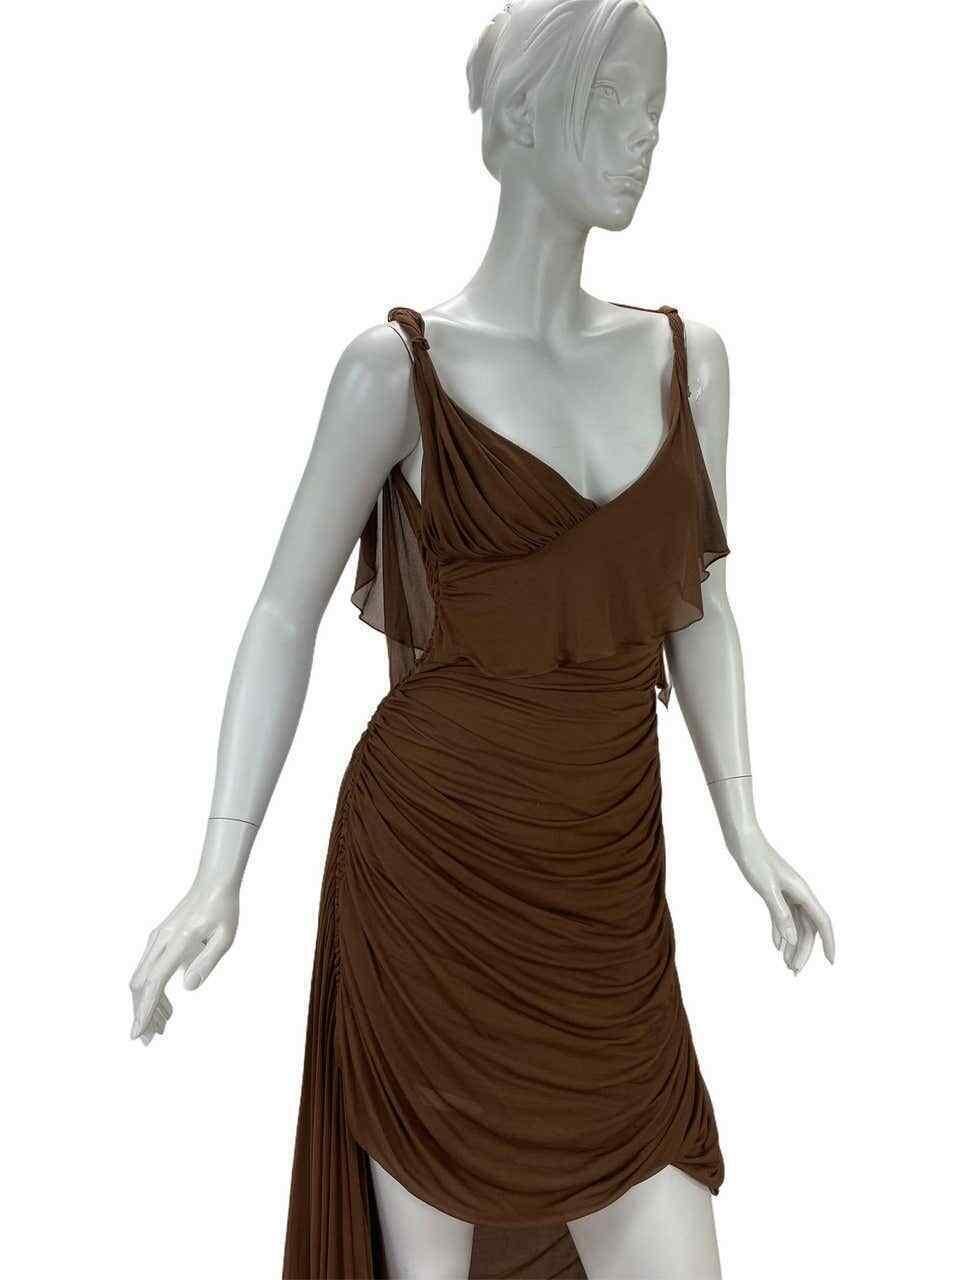 S/S 2003 Vintage Tom Ford For Gucci Greek Goddess Silk Gown as seen in Museum
Editor’s note:
Imbued with feminine charm is a dress crafted from Tom Ford’s imagination. Exclusively from the 2003 fall Gucci collection, it has been exhibited in the